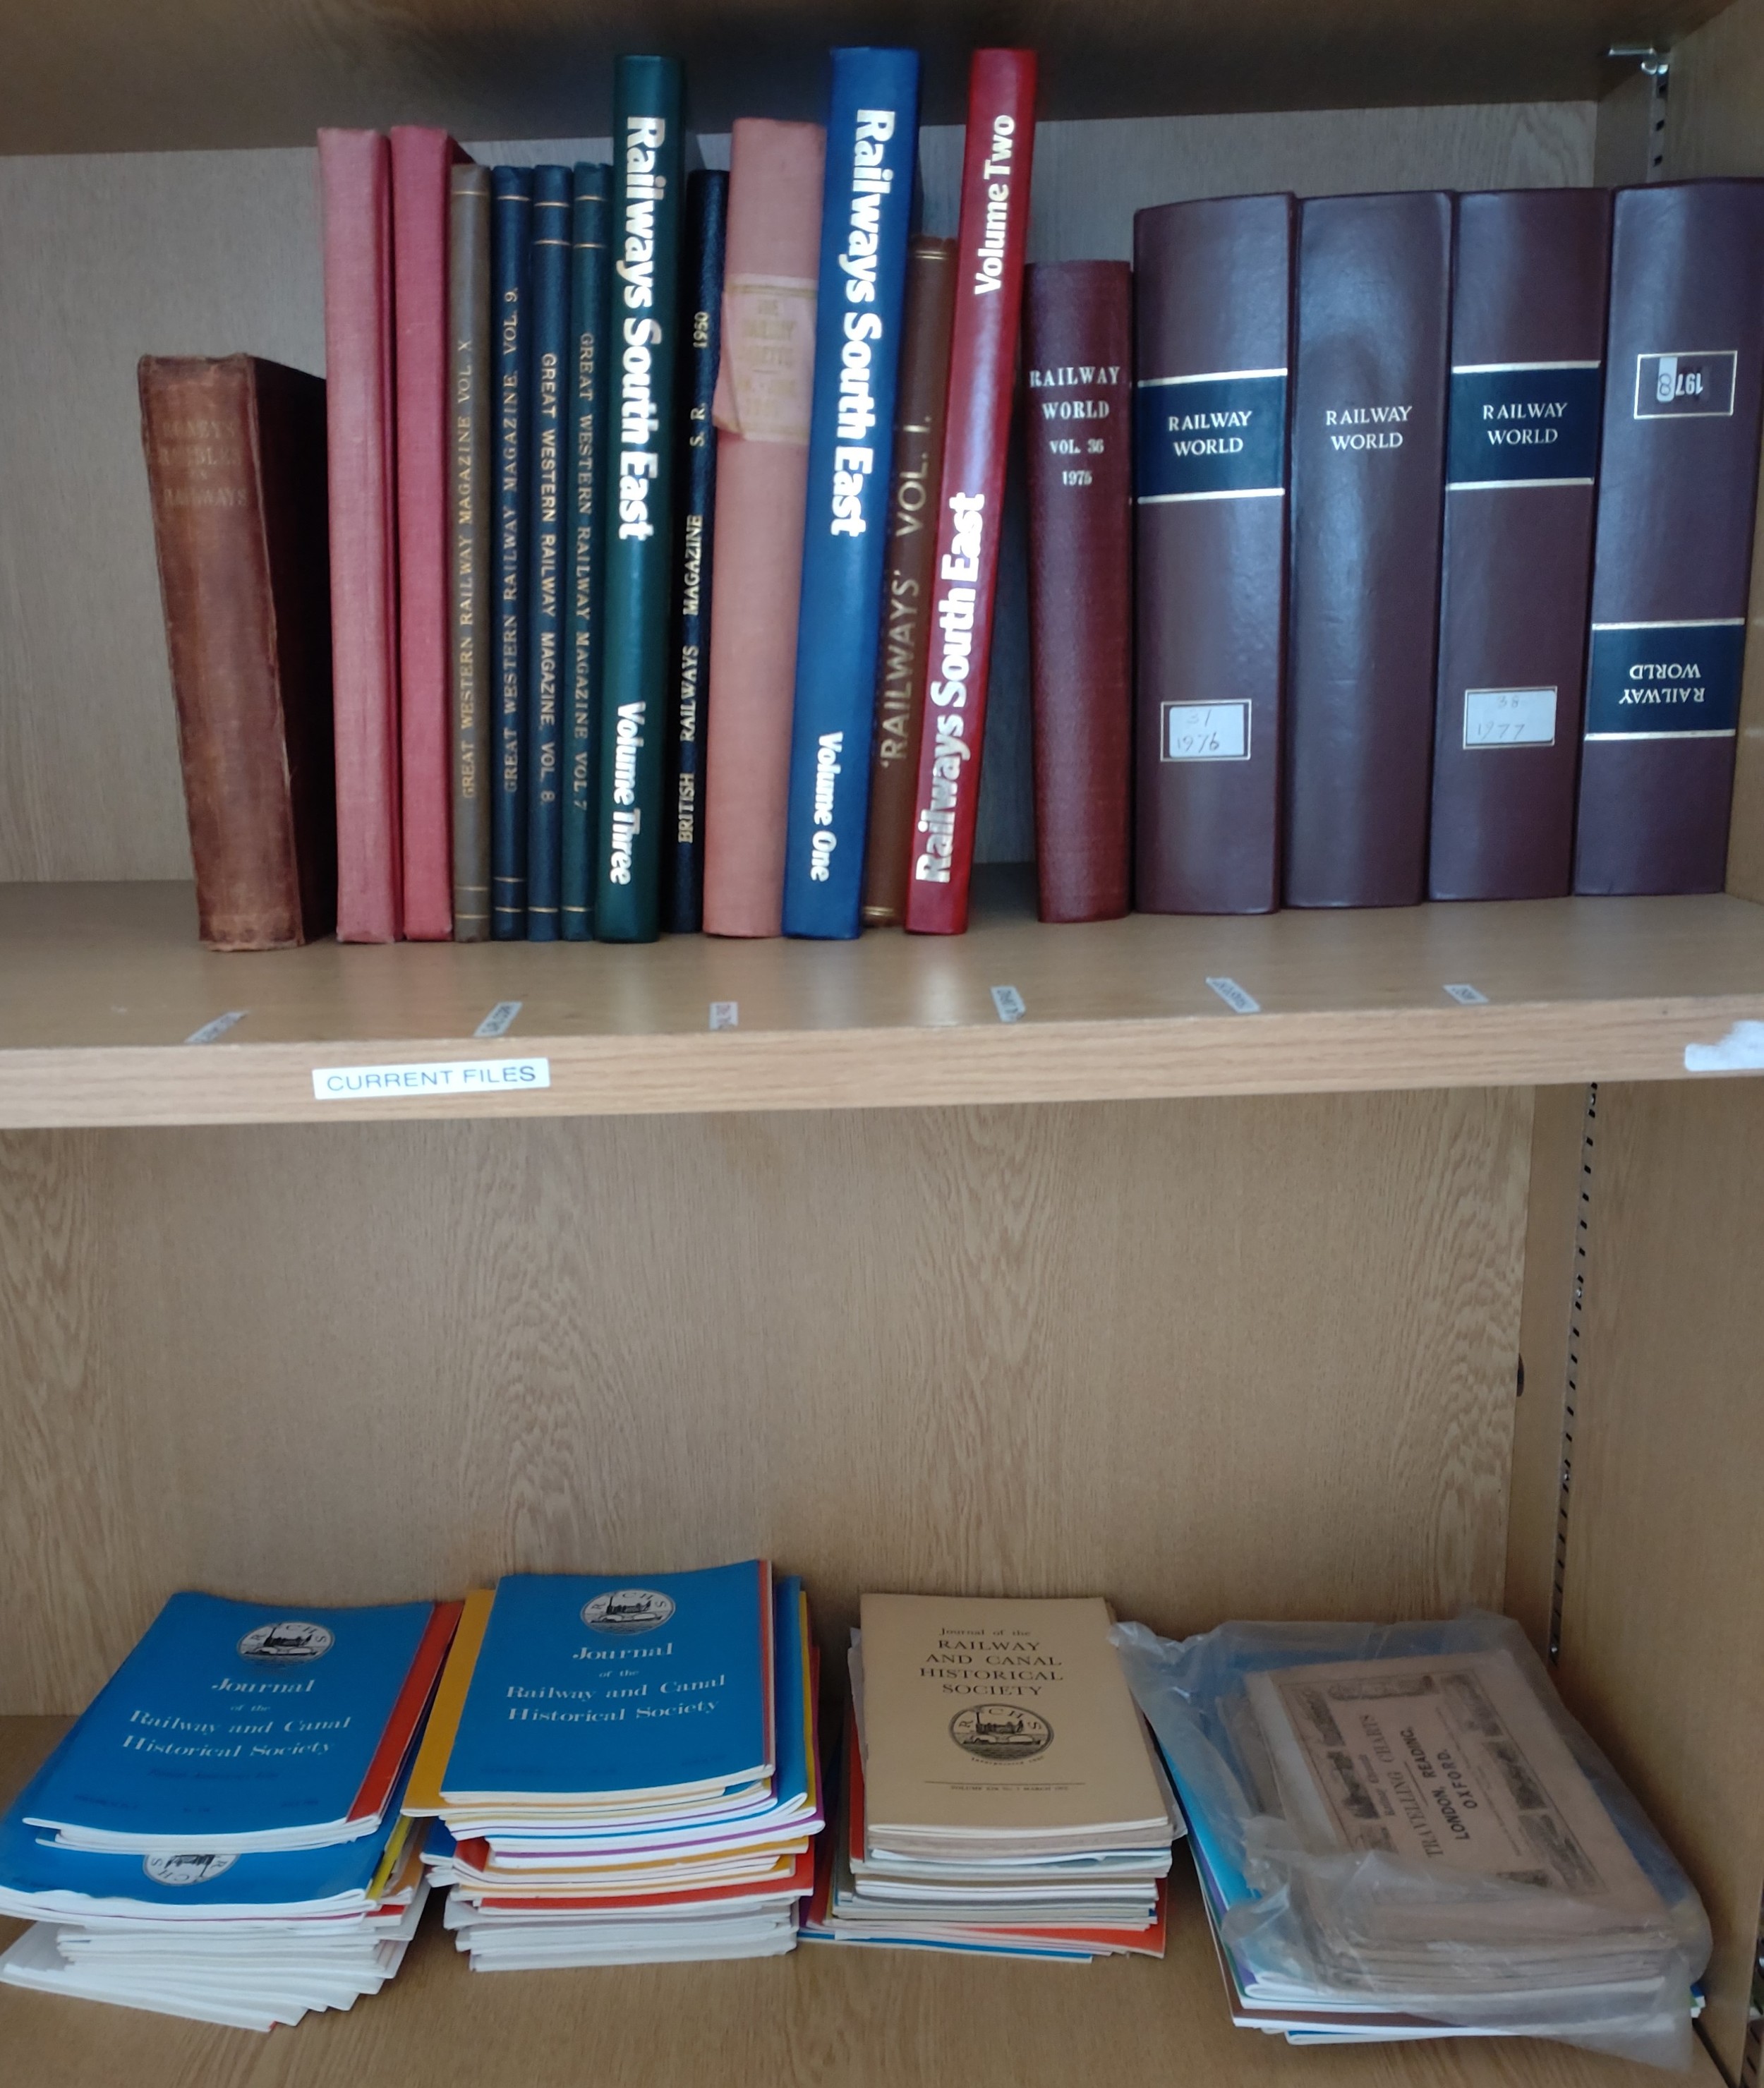 A quantity of books and brochures relating to railways